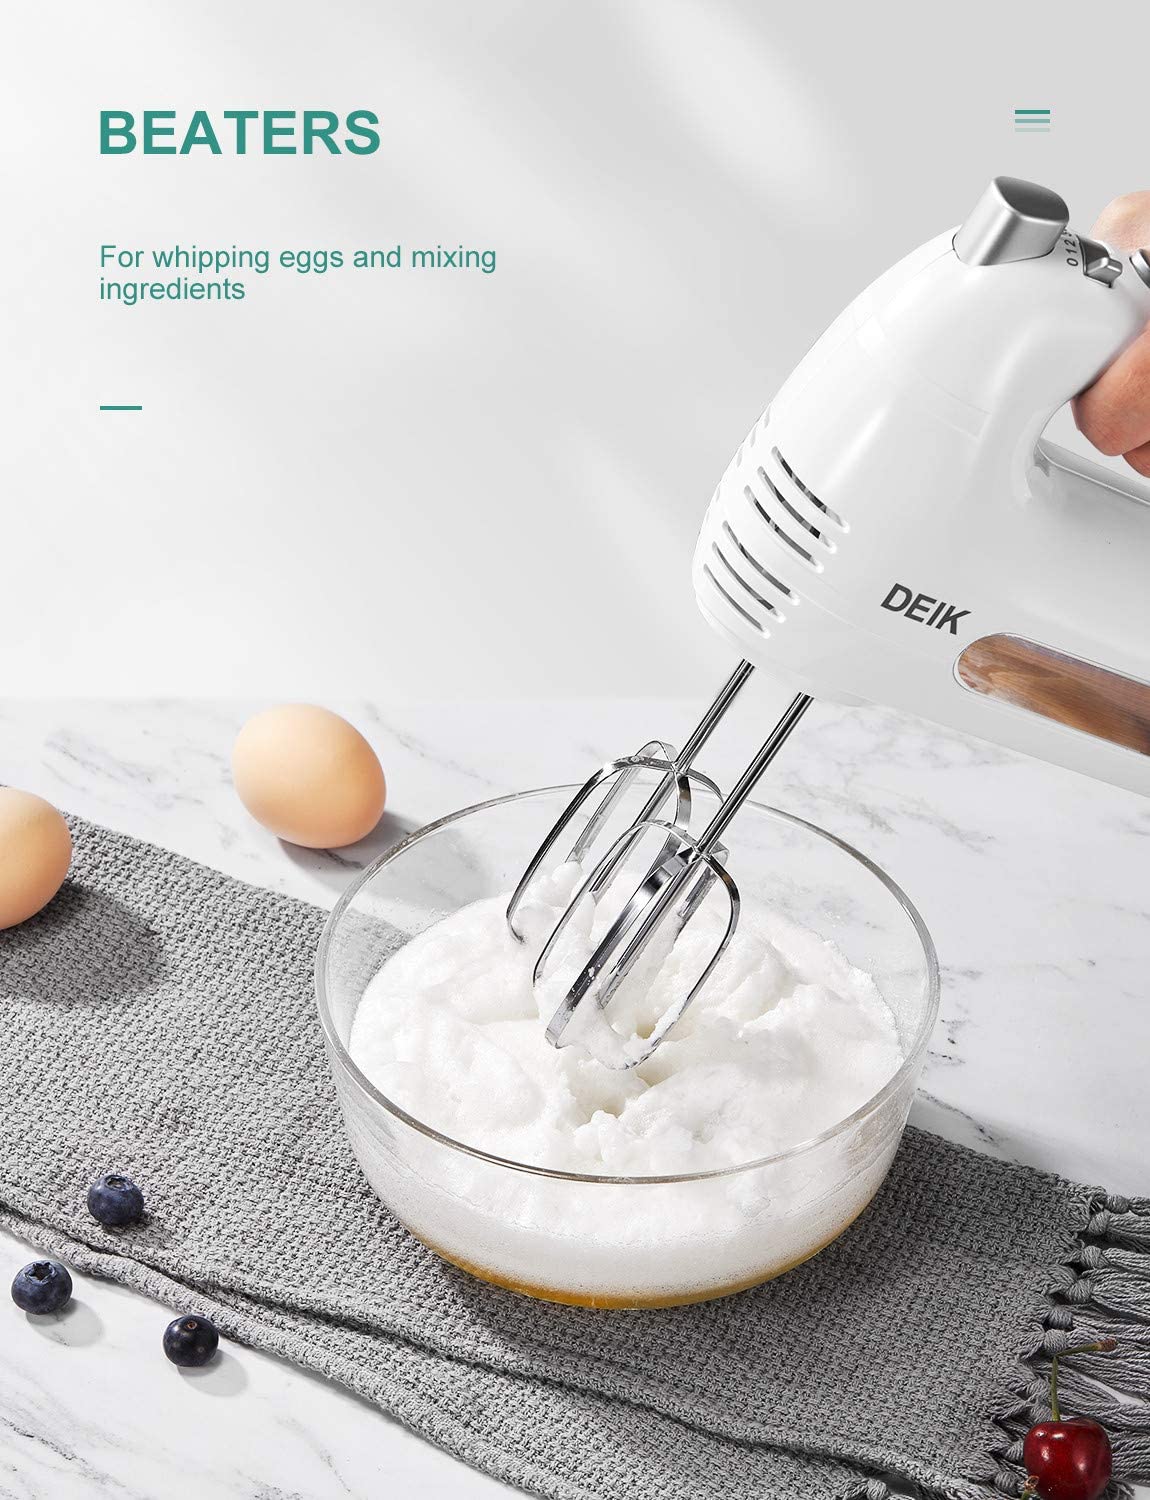 Deik Electric Hand Mixer,6-Speed 250W Hand Mixer Electric – Hand Held Mixer Includes 2 Stainless Steel Beaters and 2 Dough Hooks, Turbo Button, One Button Eject Design, White